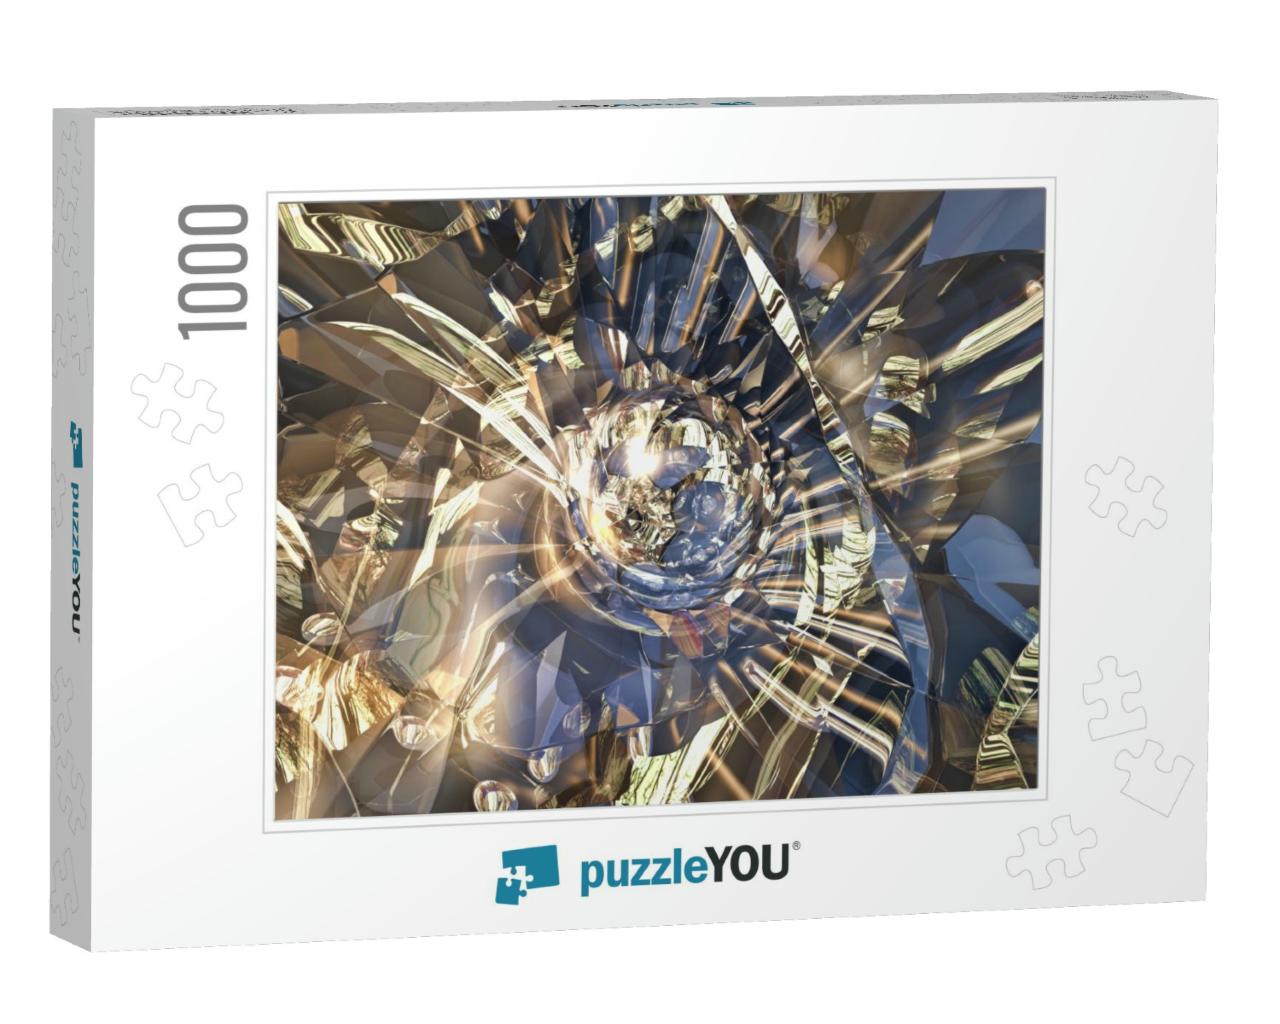 Broken Glass, Graphic Design, Rendering, Fractal, Effect... Jigsaw Puzzle with 1000 pieces